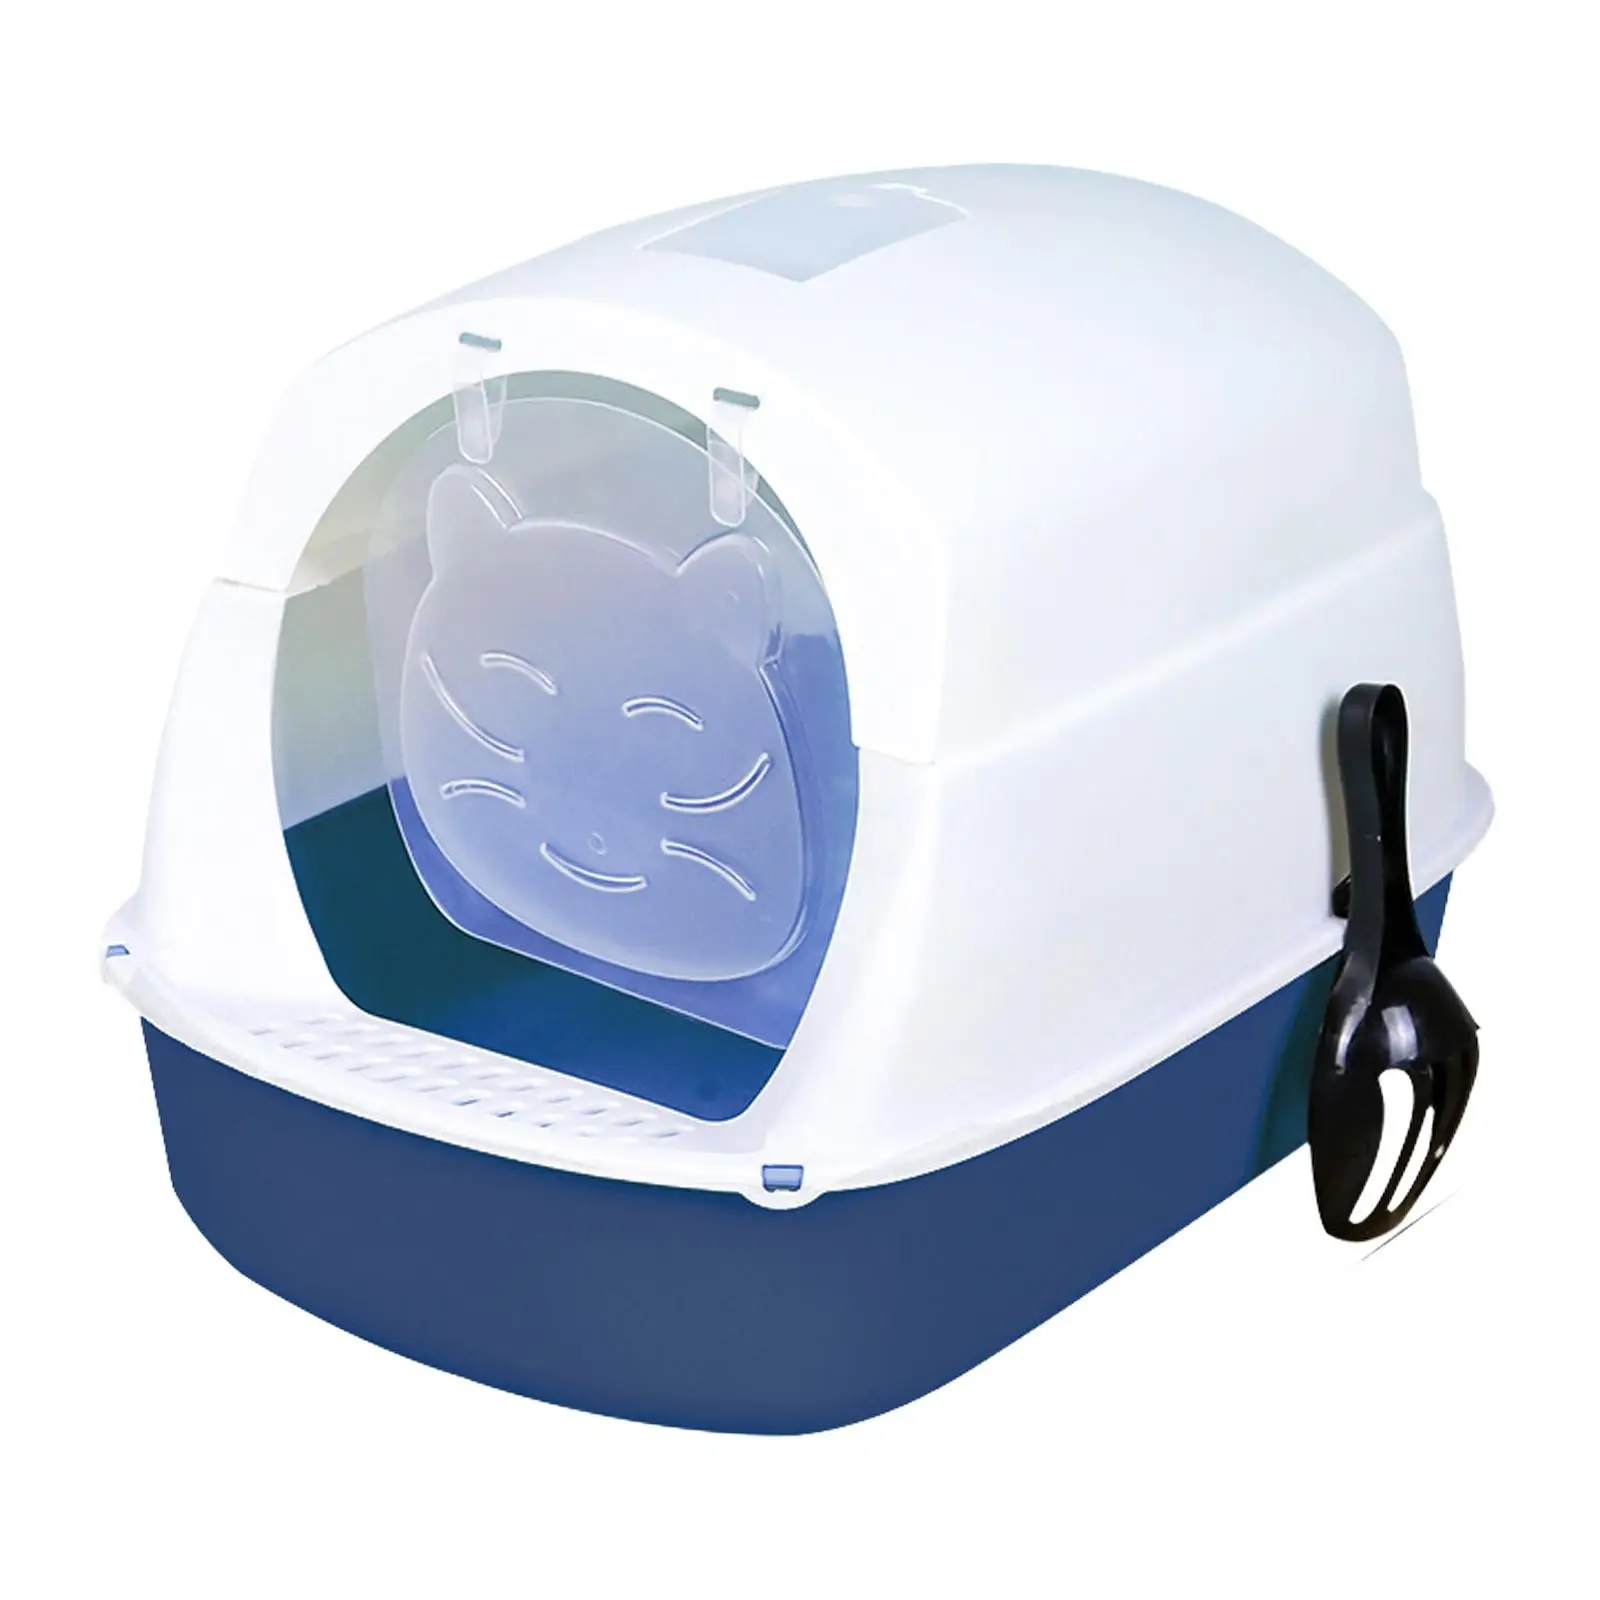 Hooded Cat Litter Box Enclosed Cat Toilet Anti Splashing Durable with Front Door Kitty Litter Tray Pet Accessories